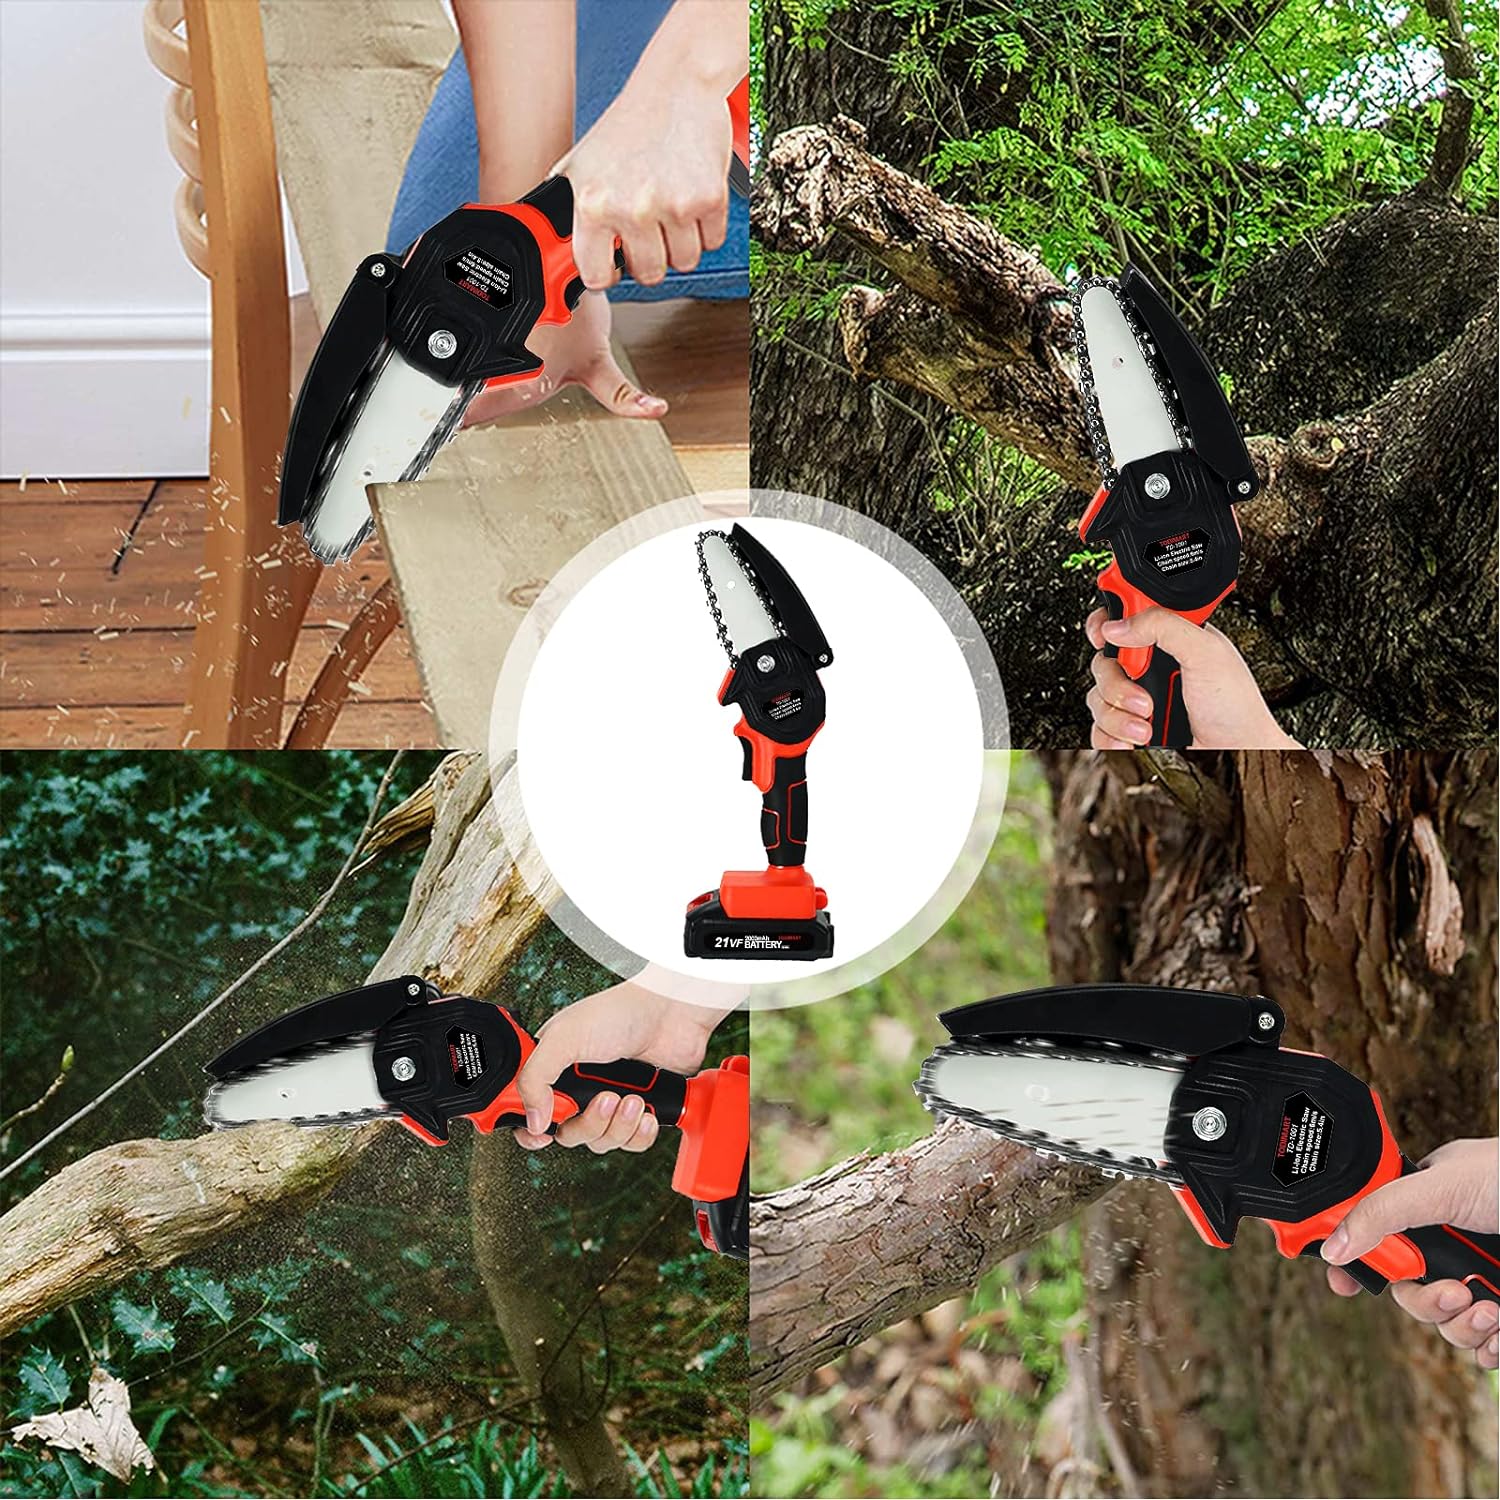 Skcoipsra Mini Chainsaw Cordless 4 Inch, 2.43 Pounds Portable Electric Chainsaw with 2 Chains & Batteries, One-Handed Power Chain Saws for Tree Trimming Branch Wood Cutting